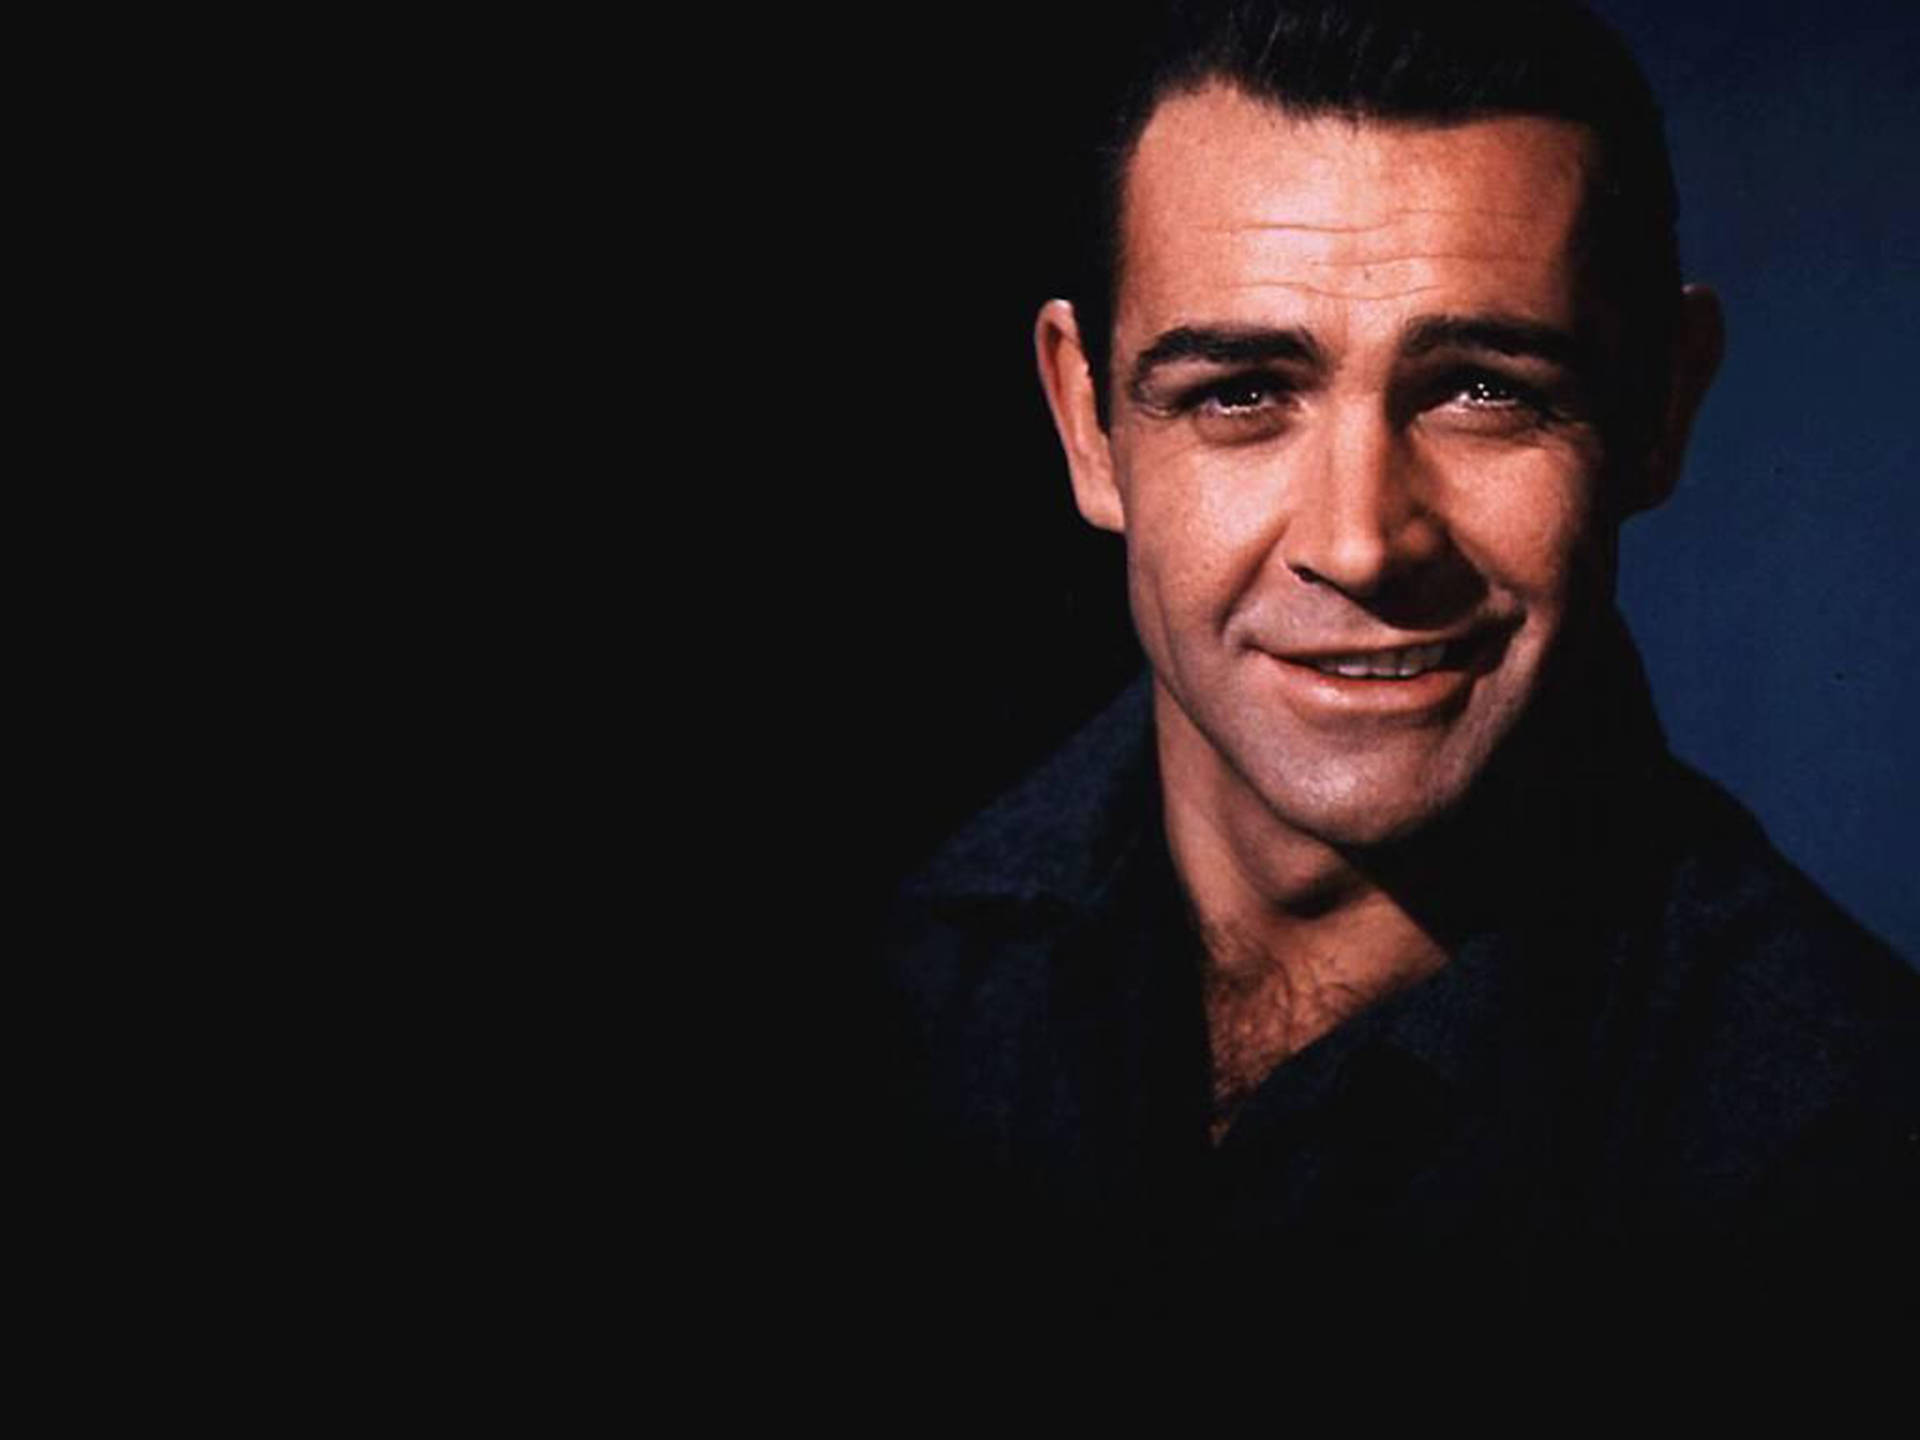 Charming Actor Sean Connery Wallpaper